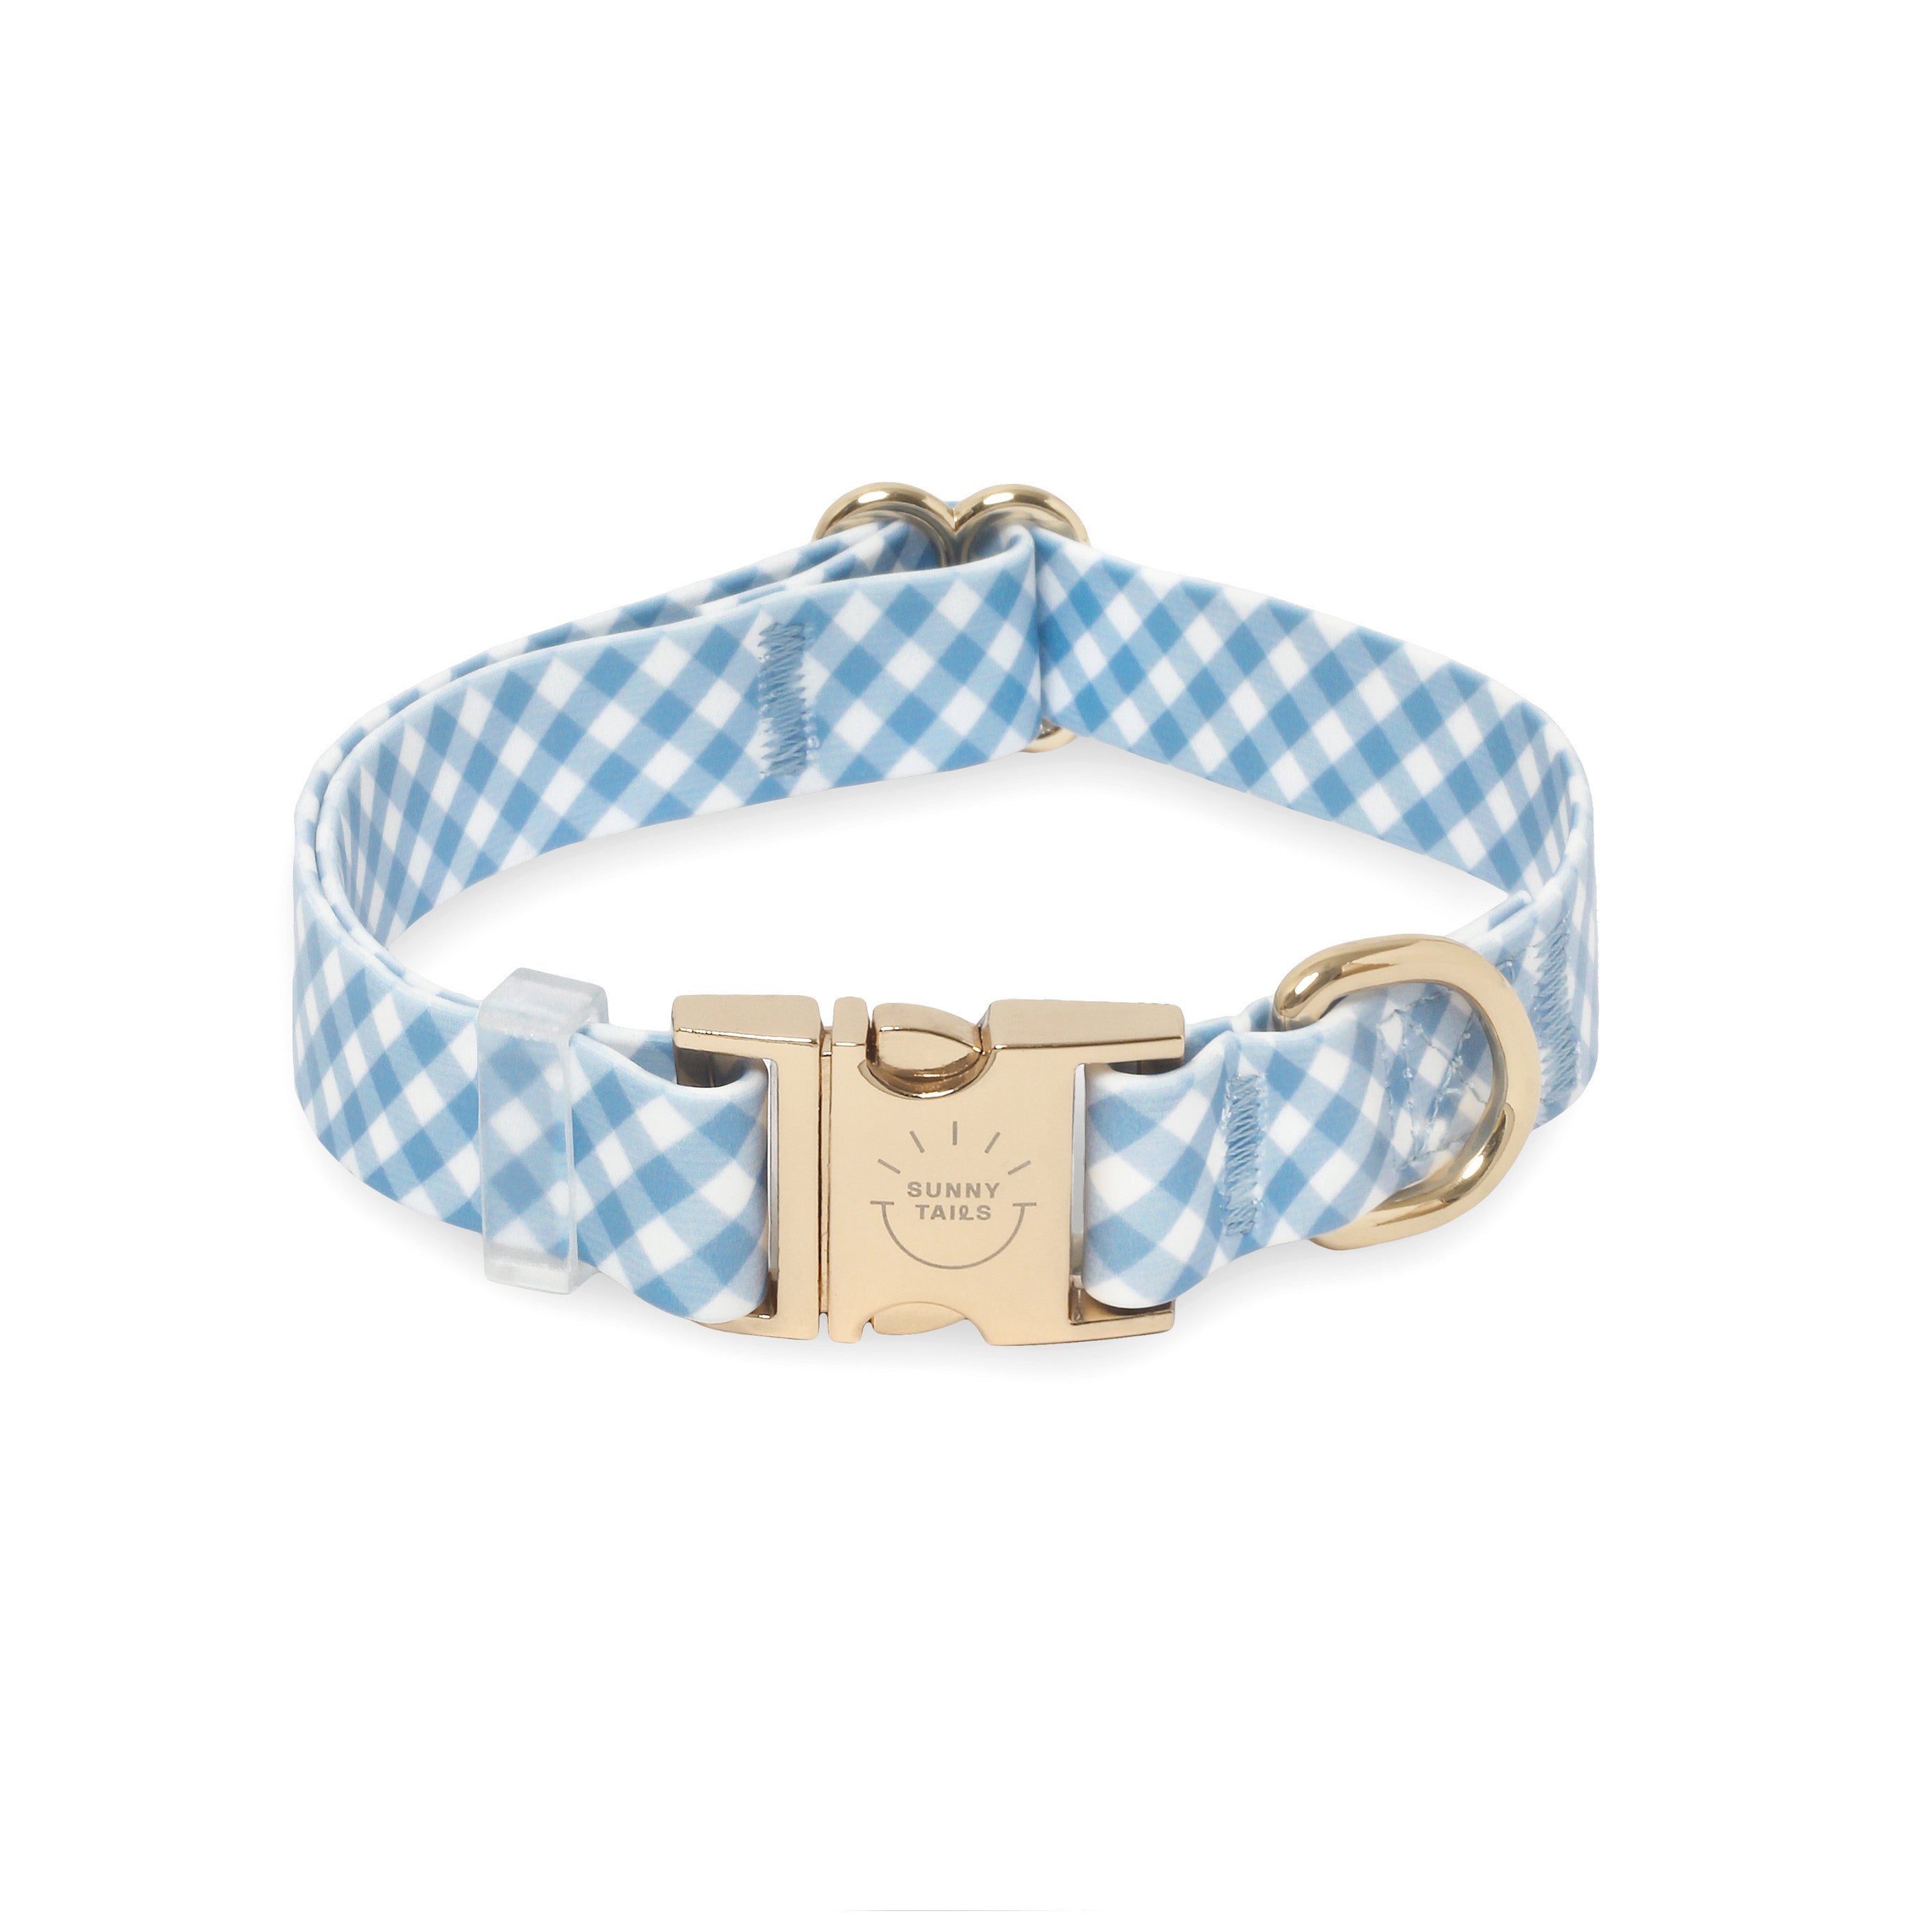 Louis Vuitton Blue Collar and Leash freeshipping - The Good Dog Store